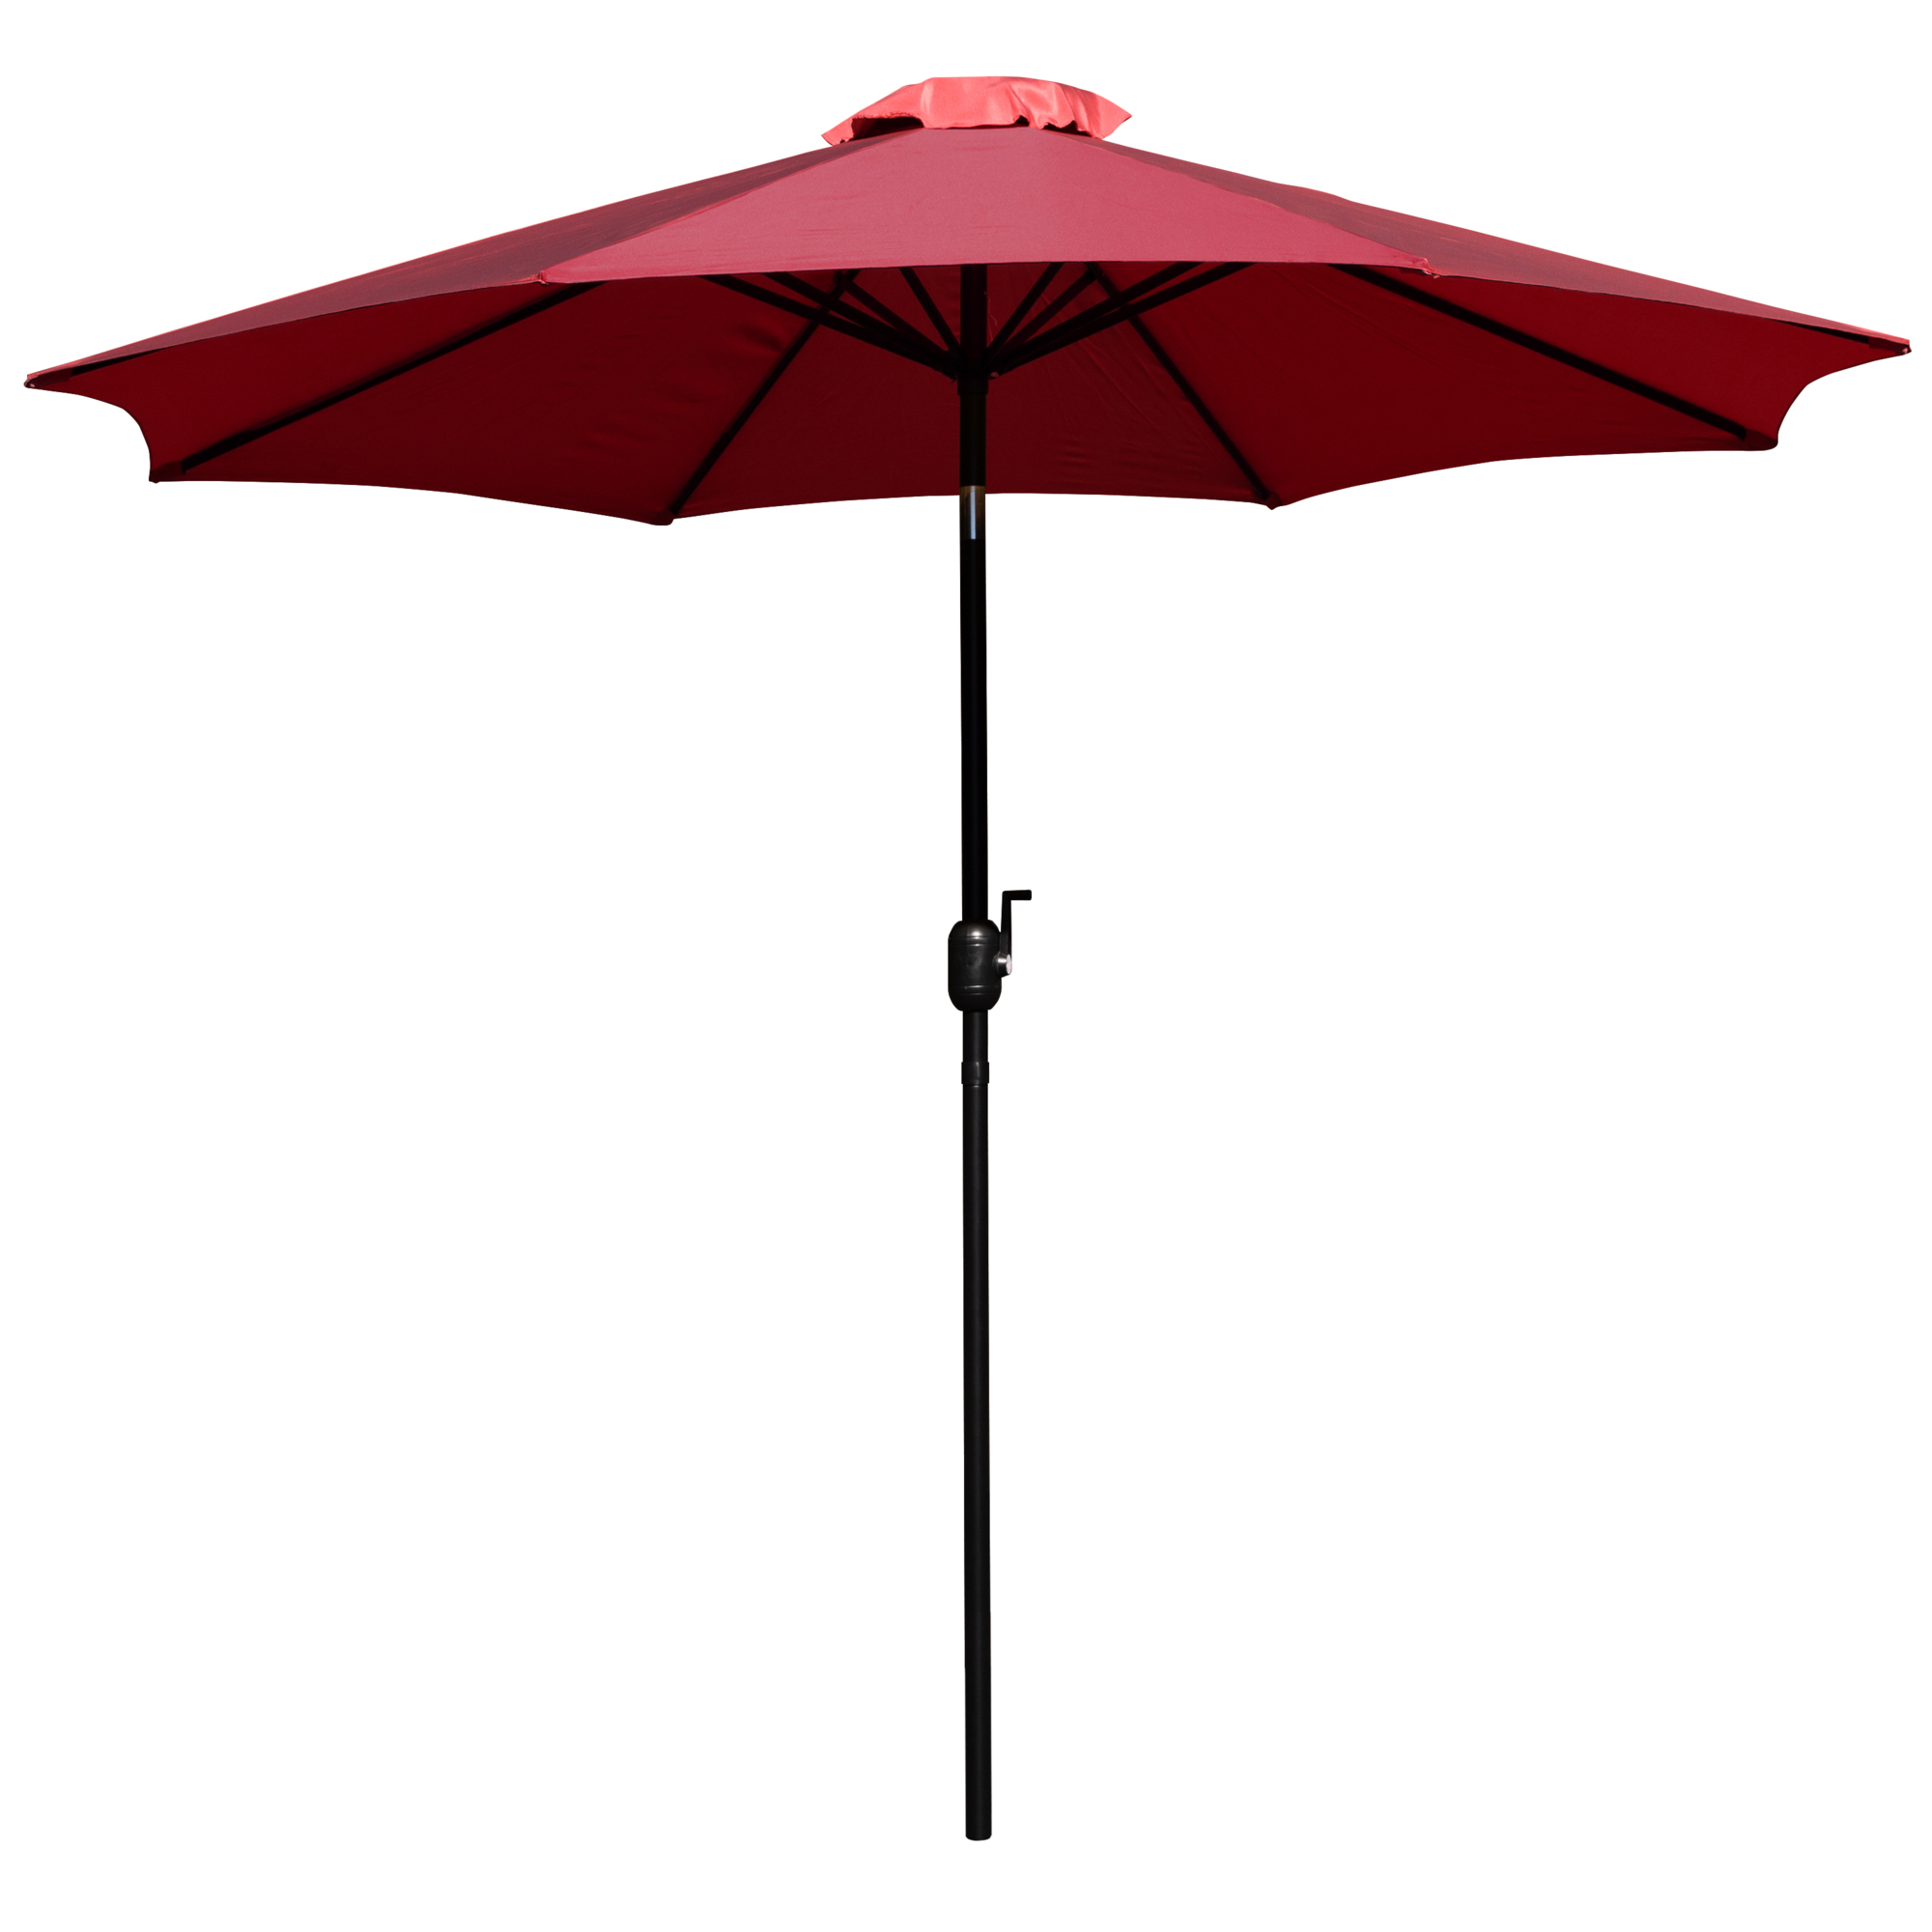 Flash Furniture, Red 9ft. Round Umbrella - Crank and Tilt Function, Canopy Diameter 9 ft, Shape Octagon, Model GM402003RED